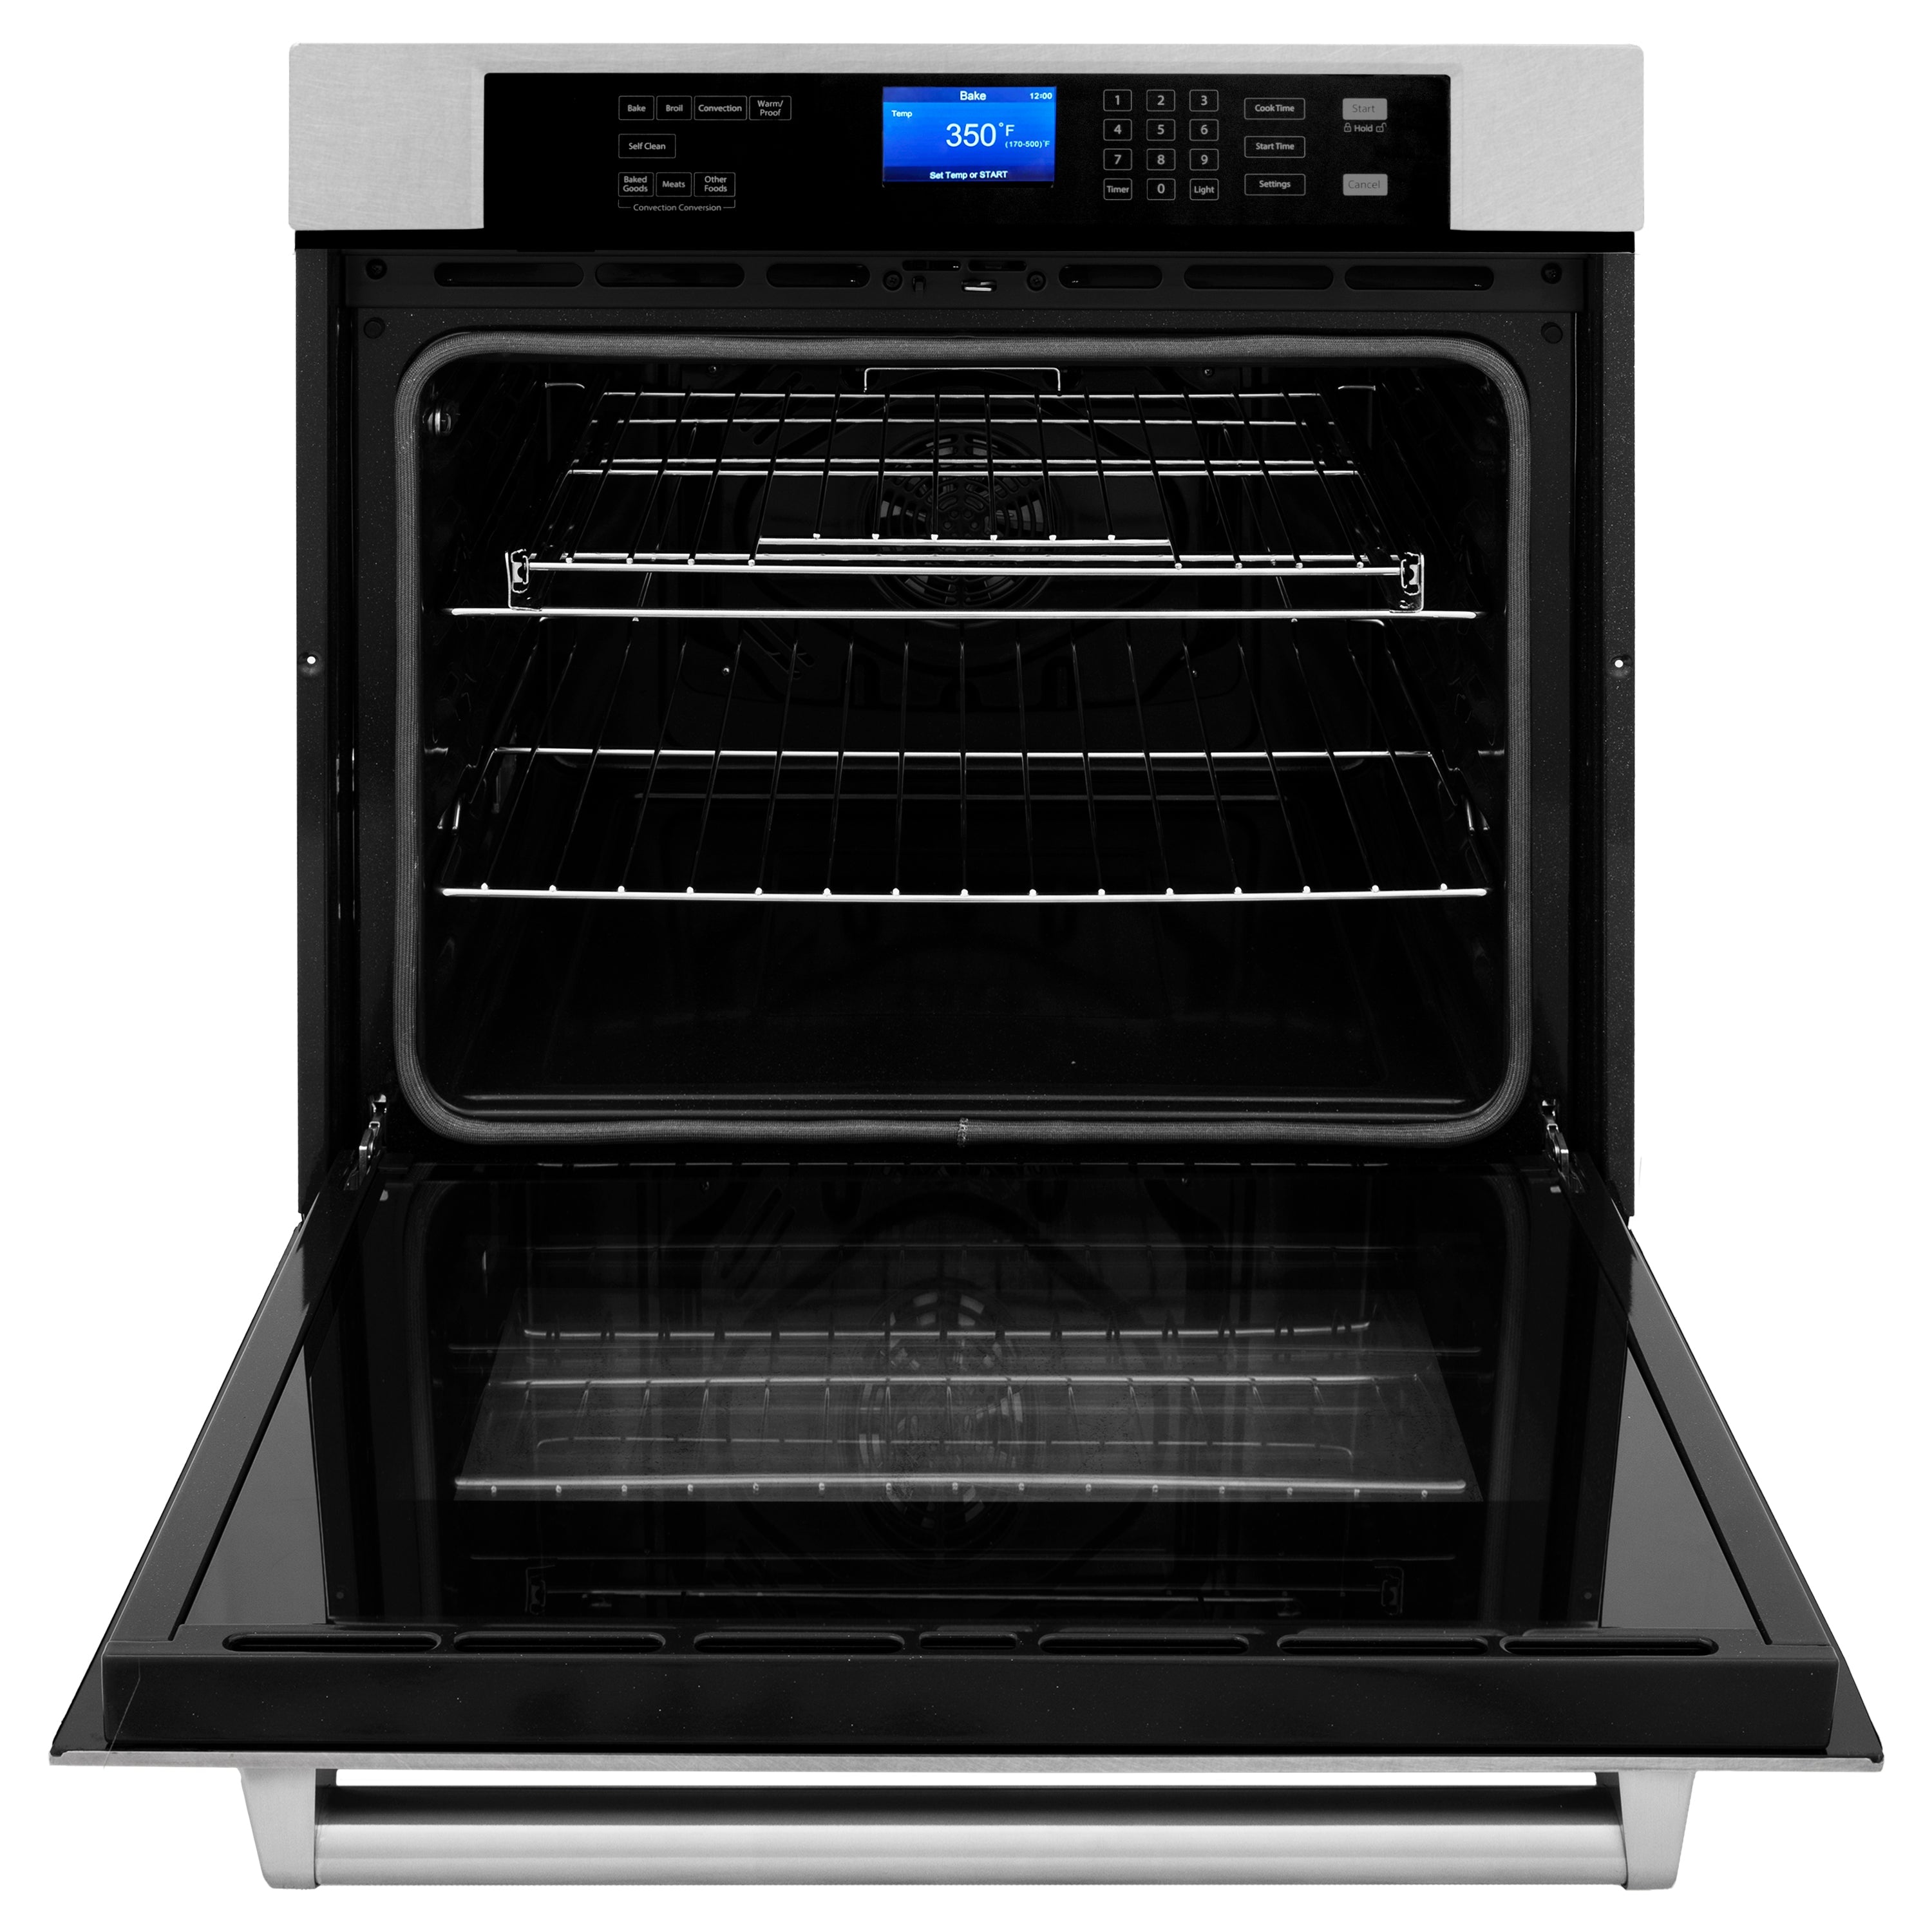 ZLINE 30" Professional Single Wall Oven with Self Clean and True Convection in Fingerprint Resistant Stainless Steel (AWS-30)